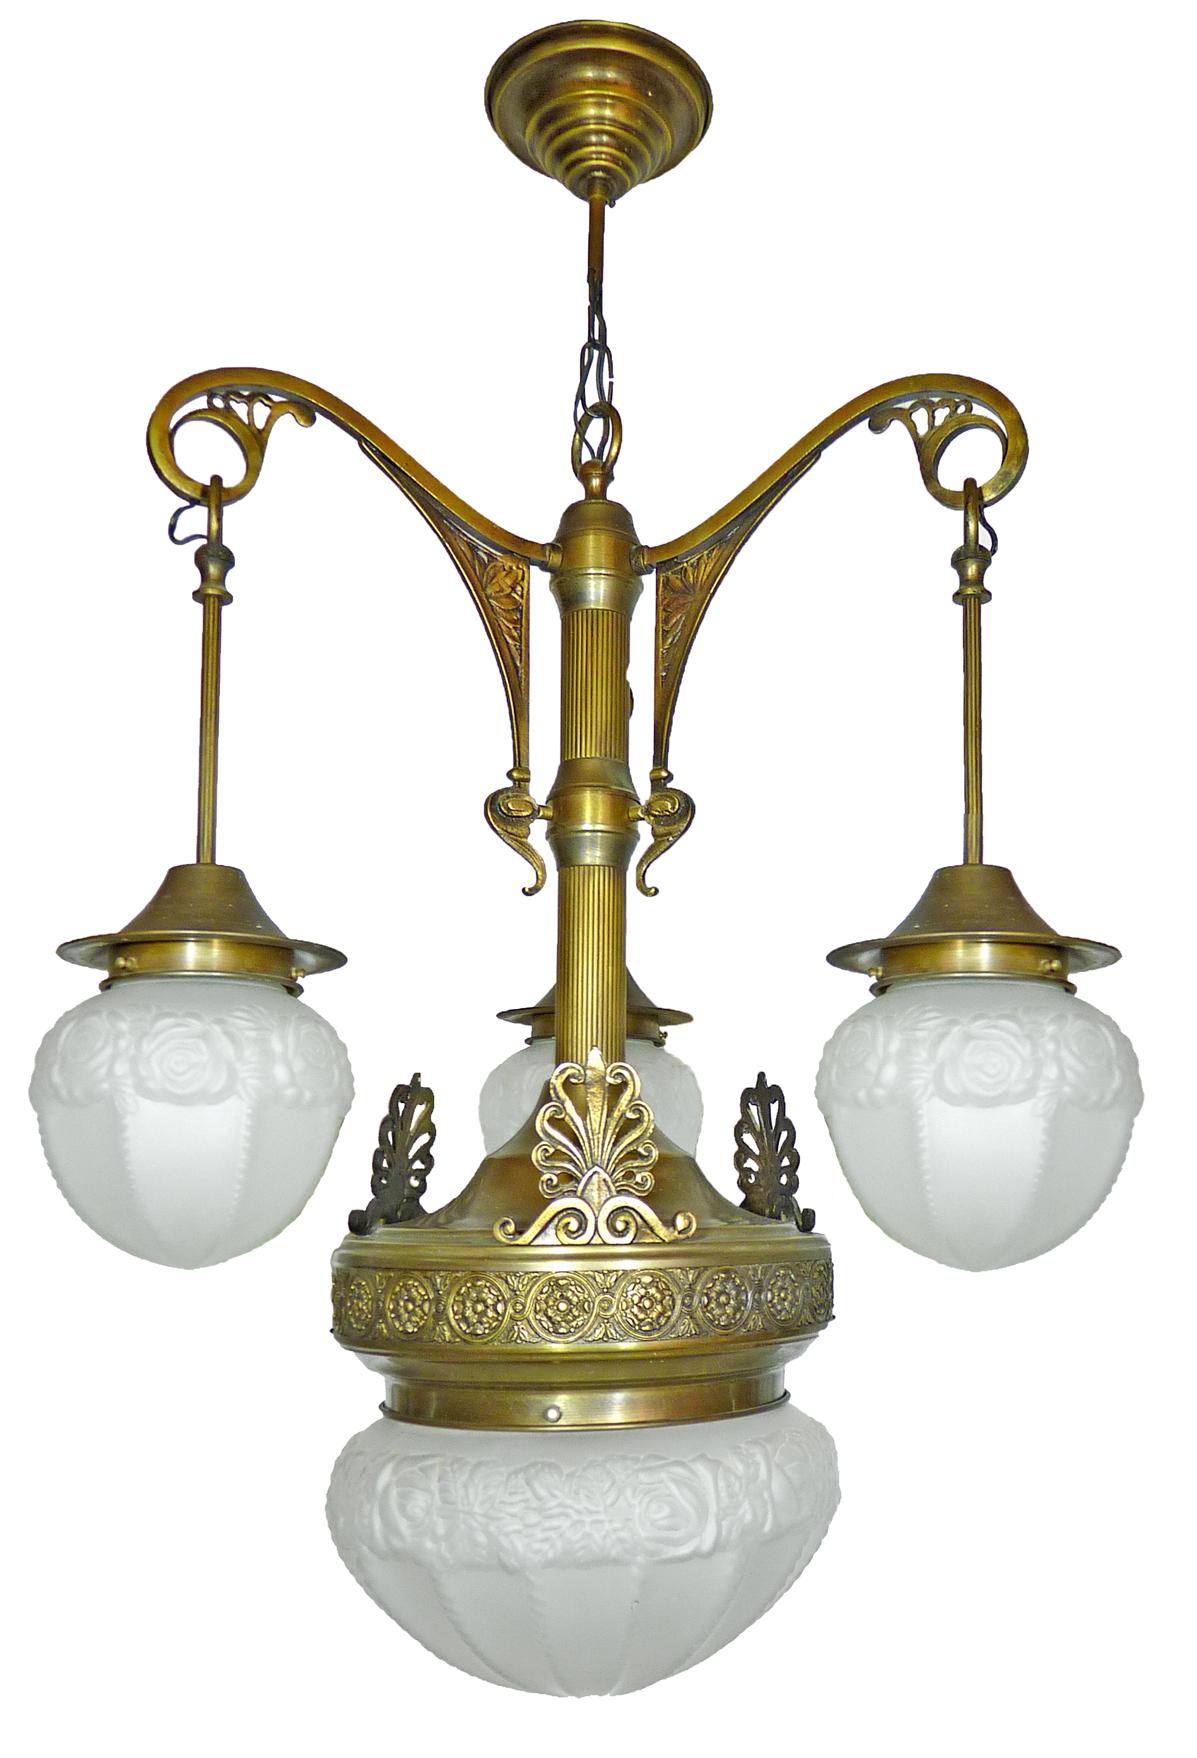 20th Century Fabulous French Art Deco Art Nouveau Brass Molded Frosted Glass Chandelier For Sale